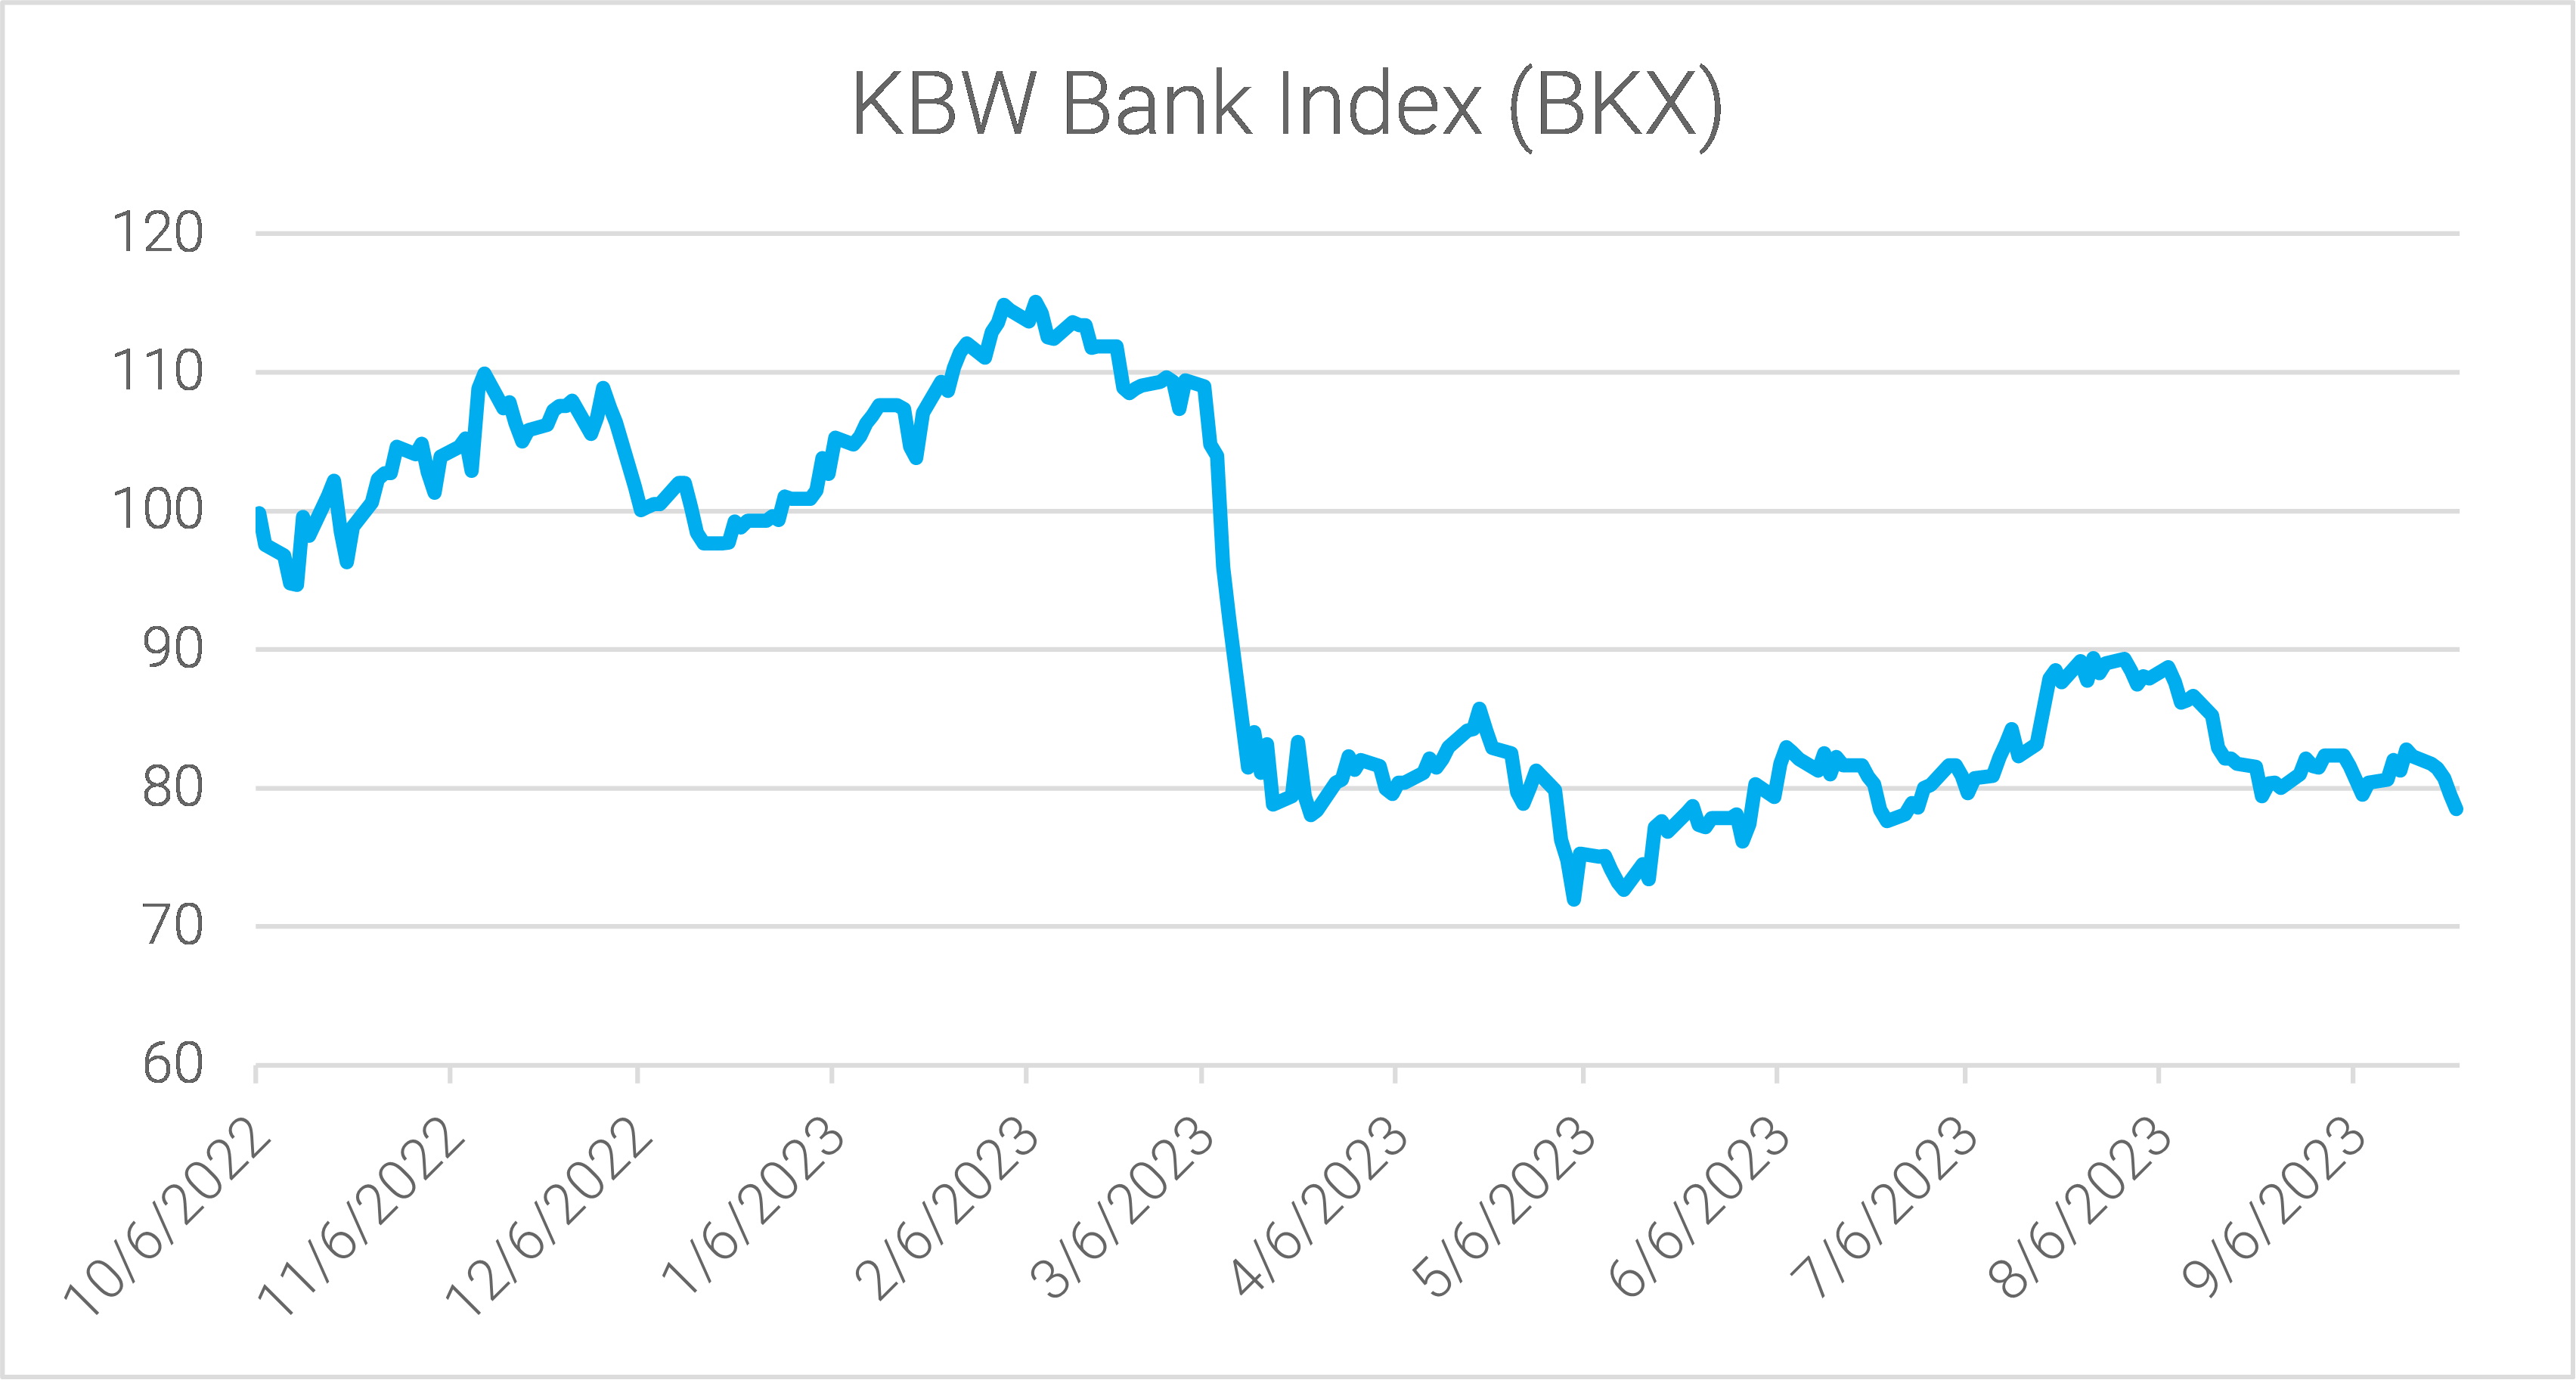 01-the-kbw-bank-index-declined-4.6-percent-last-week-underperforming-the-s&p-500-by-1.7-percent